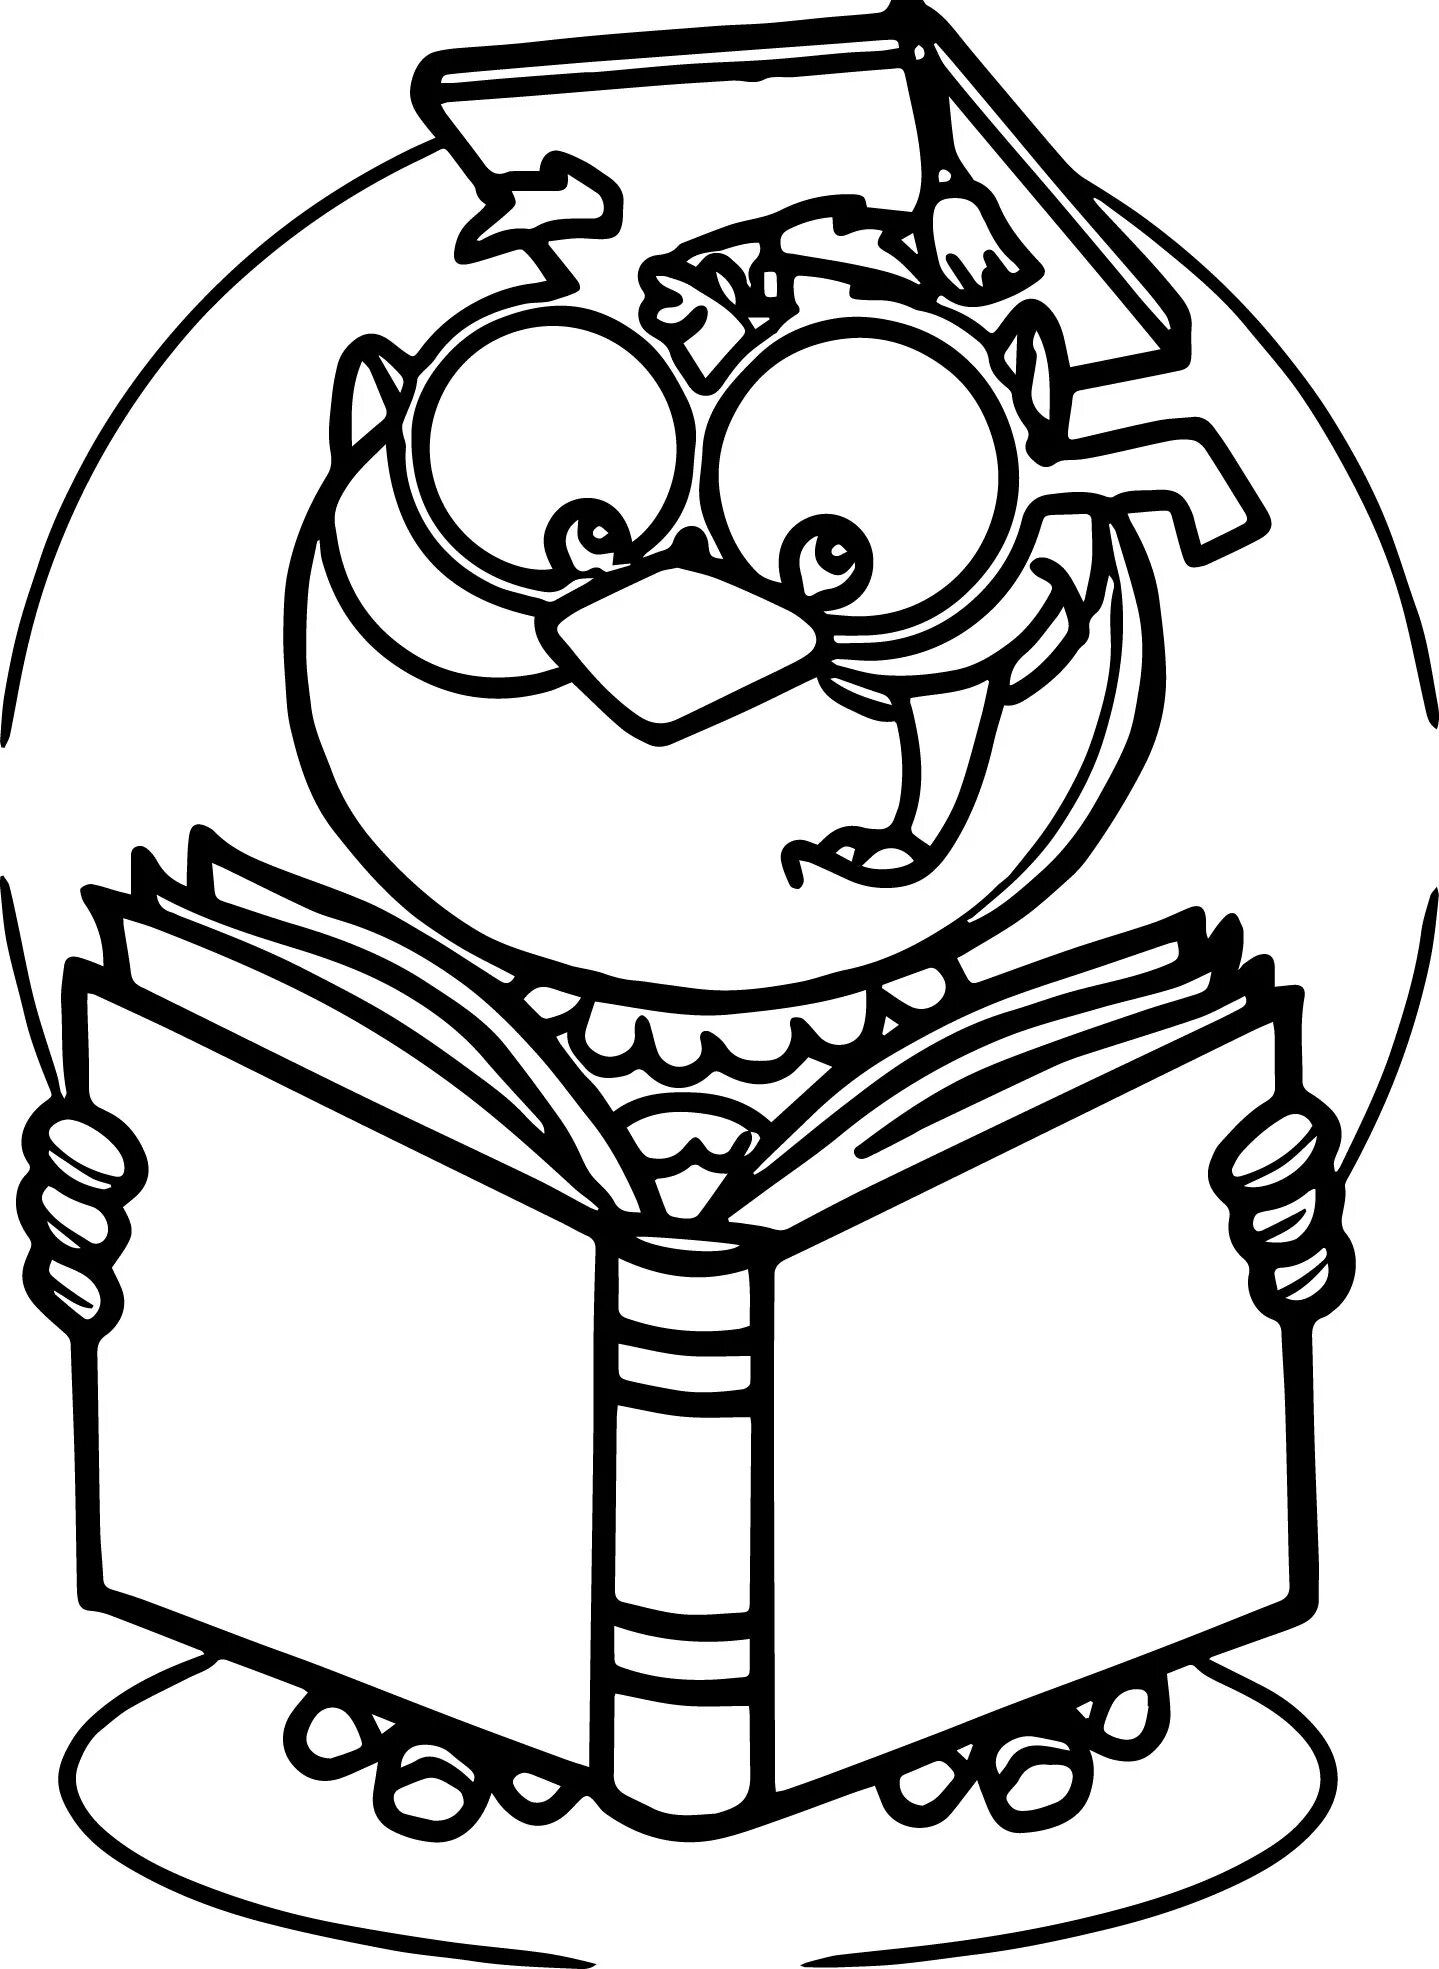 Owl with books #14